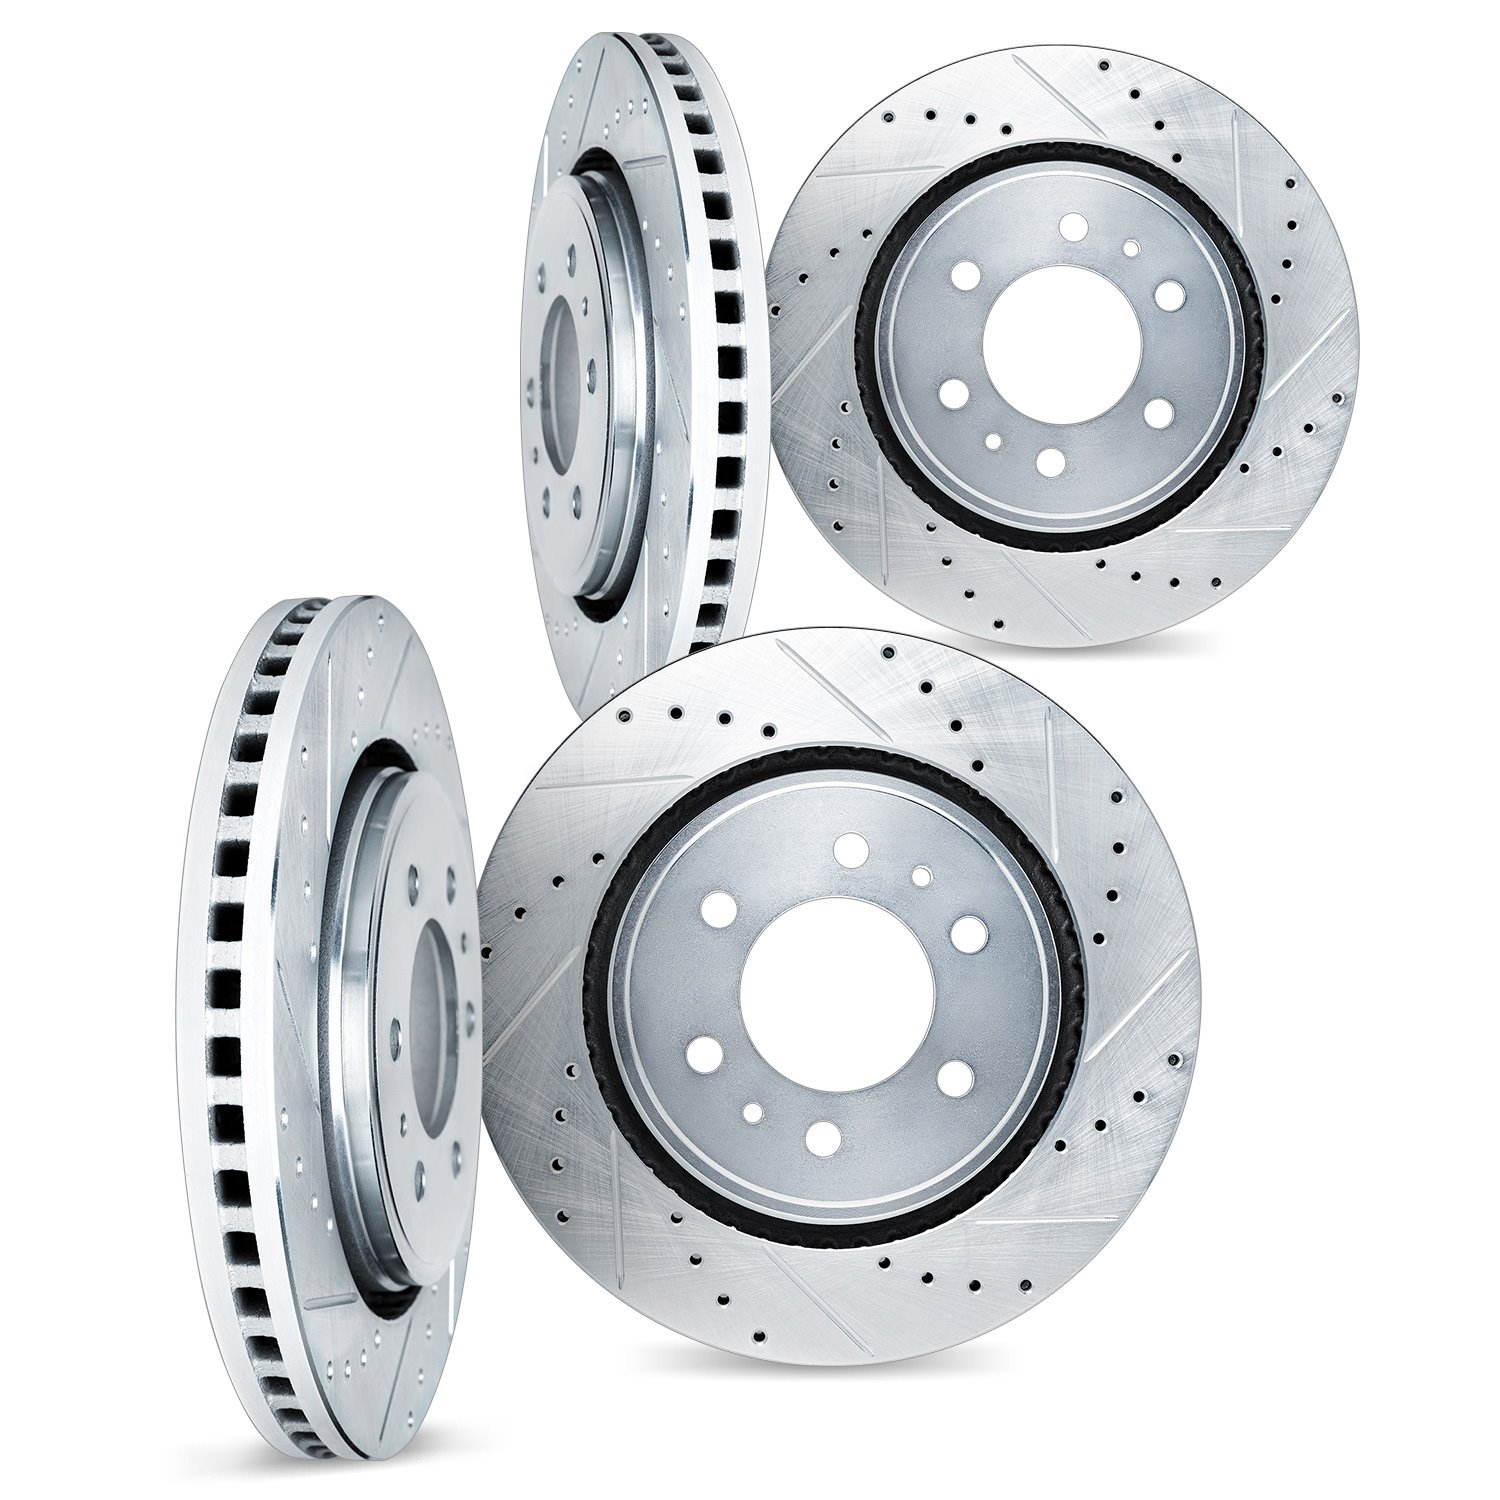 7004-67131 Drilled/Slotted Brake Rotors [Silver], Fits Select Infiniti/Nissan, Position: Front and Rear